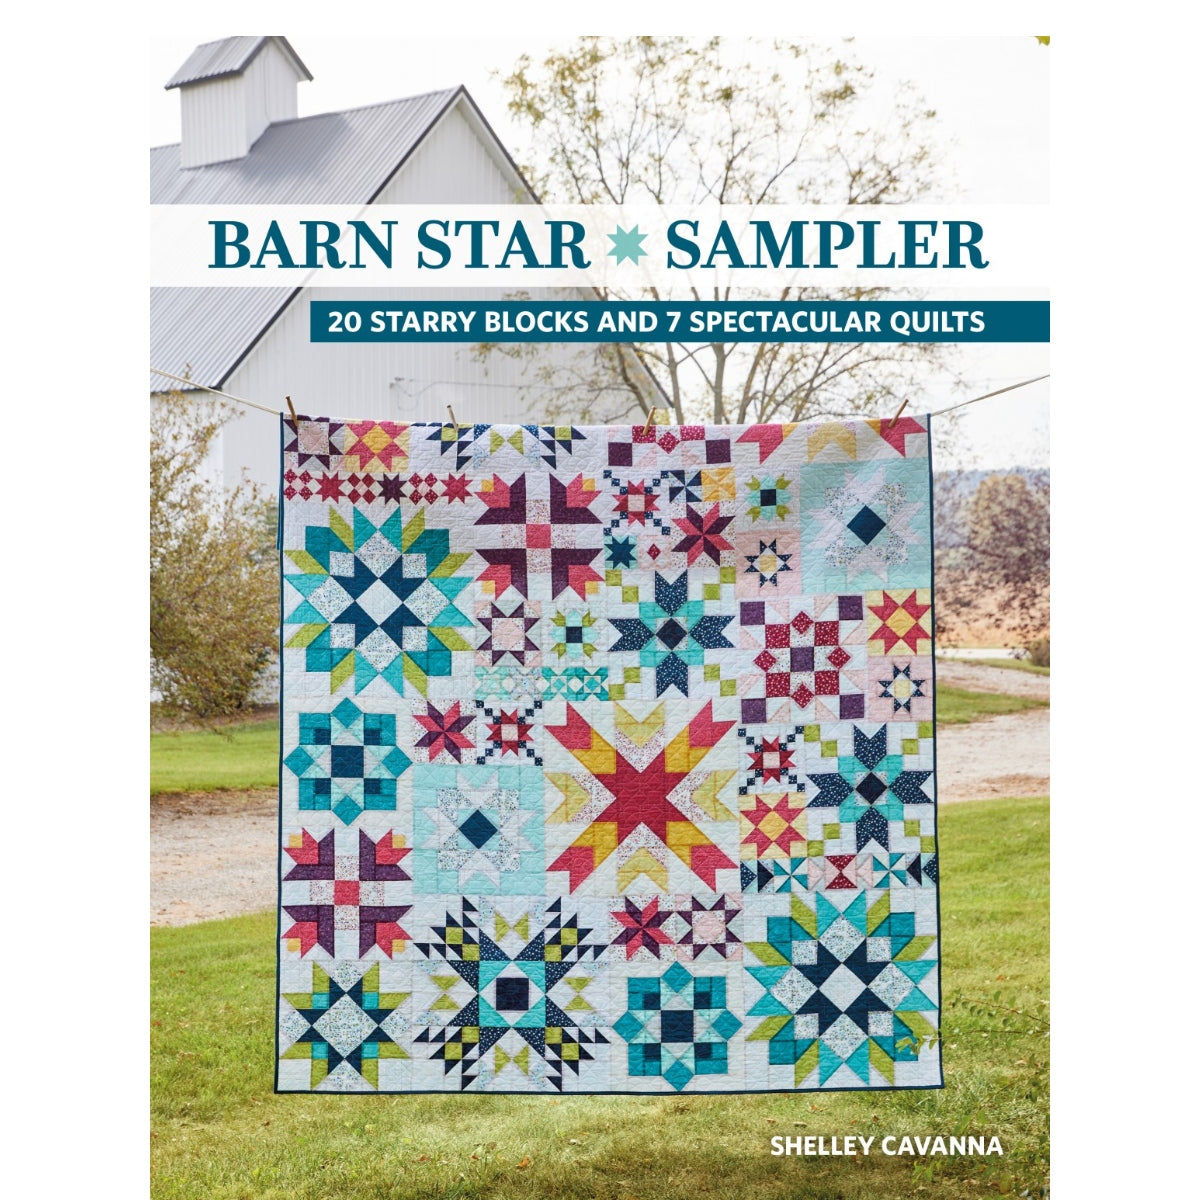 A Blockbuster Sampler and Sparkling Projects Inspired by painted and wood quilt blocks that adorn barns, author Shelley Cavanna shares 20 blocks and 7 quilt designs that are destined to pass the test of time. The Barn Star Sampler quilt, quite possibly the star of the show, incorporates 20 different block designs spanning 4" to 24" in a fresh and modern sampler-quilt layout  Pages: 80 Re-Publish Date: March 2023 Size: 8-1/2in x 11in Softcover